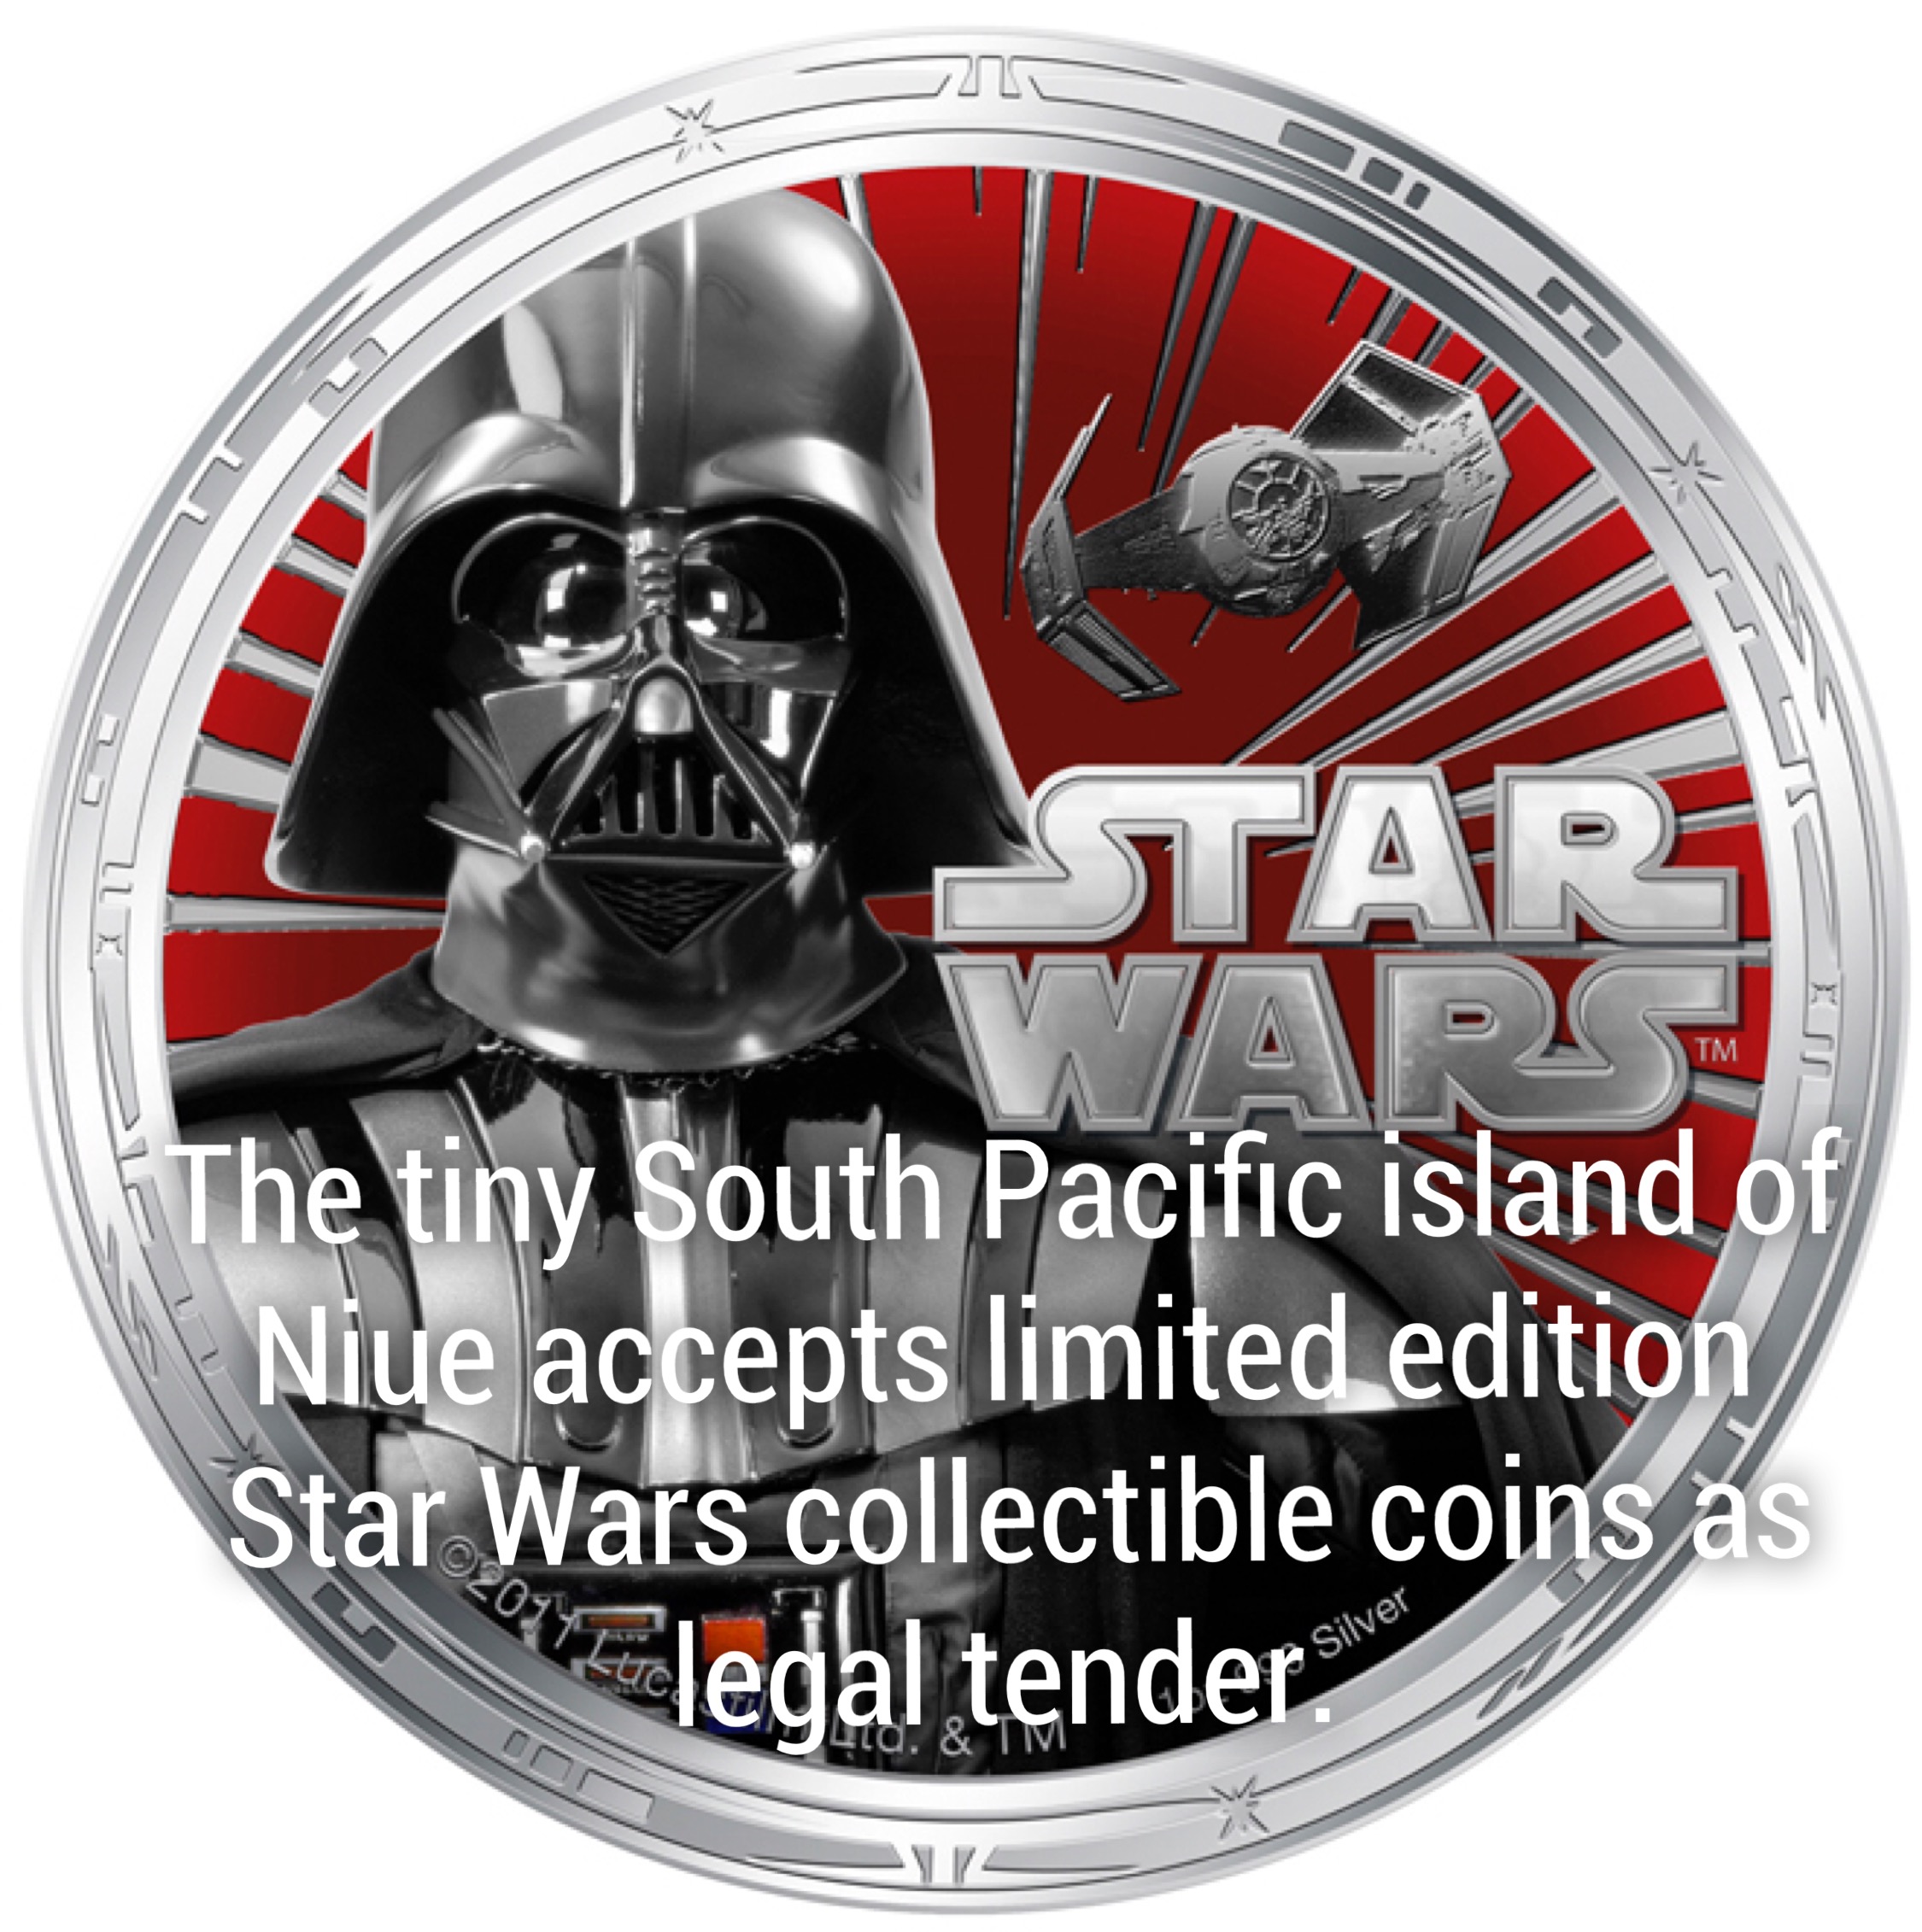 label - The tiny South Pacific island of Niue accepts limited edition Star Wars collectible coins as Illegal tender